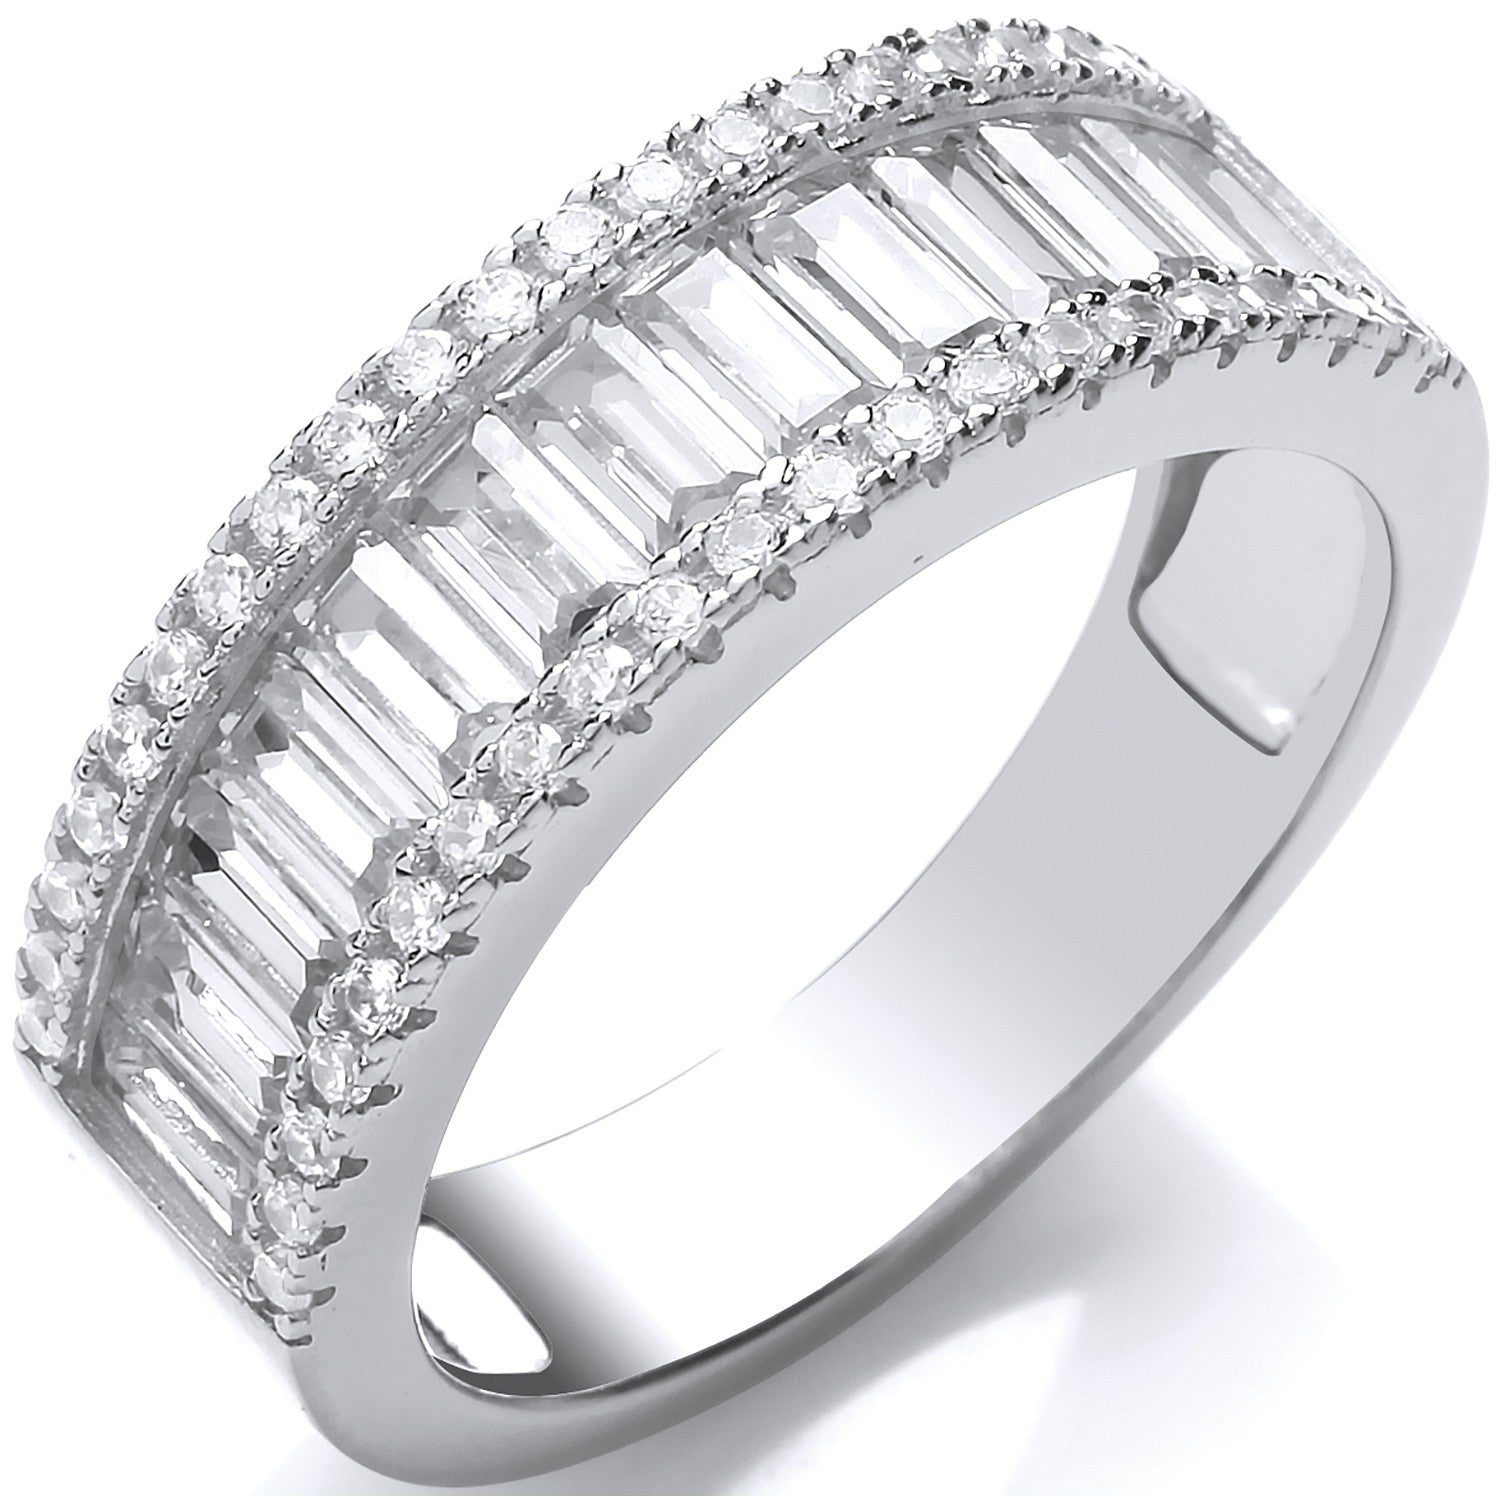 Cubic Zirconia Eternity Rings: Best Prices, Buy Eternity Ring with